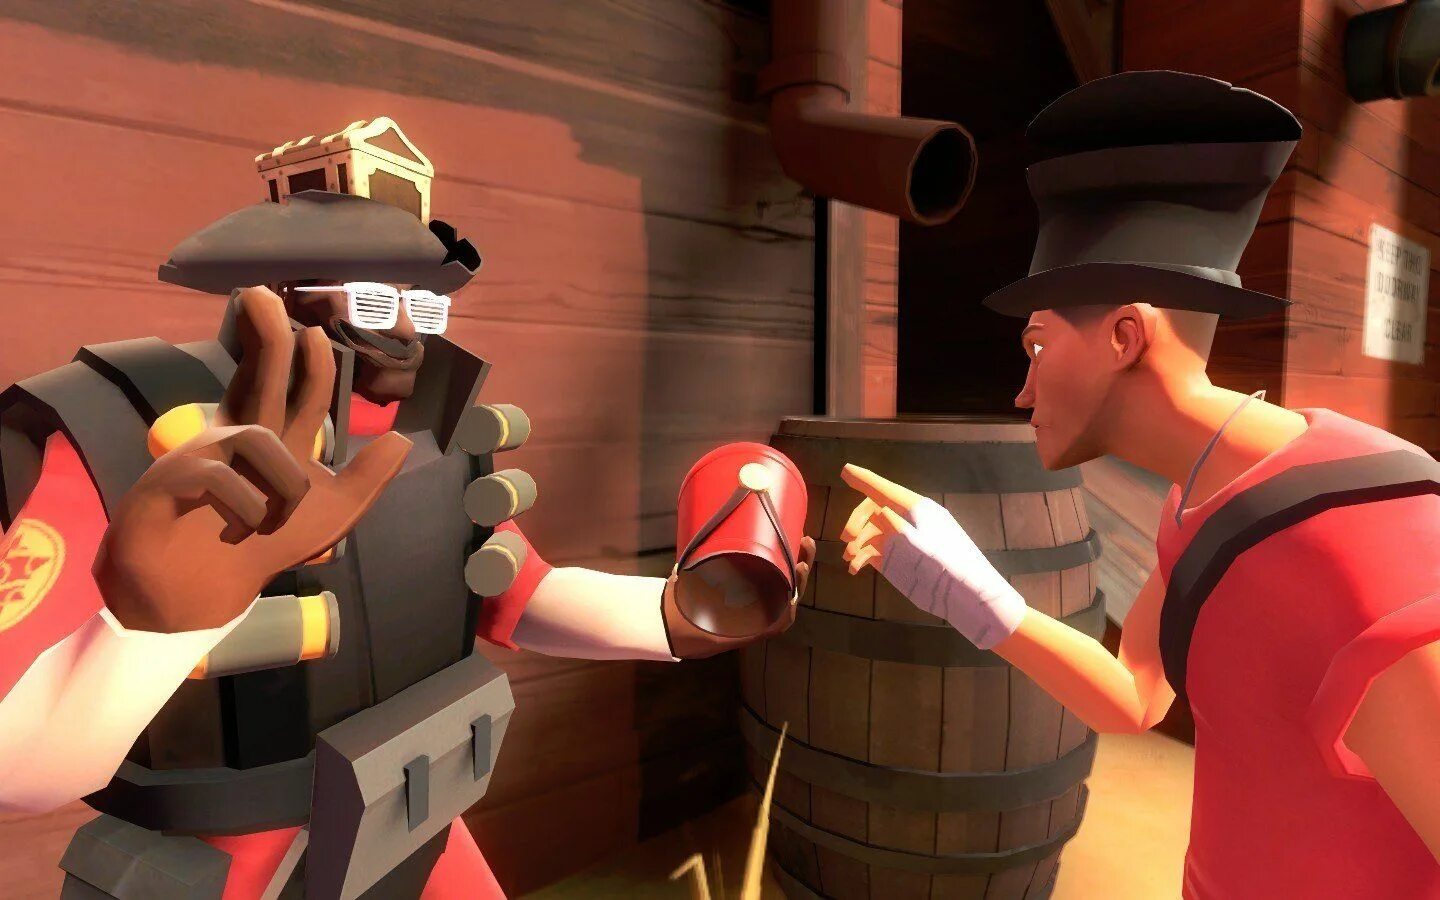 Tf2 selling. Scout tf2. Team Fortress 2 Scout. Скаут тим фортресс 2. Tf2 Demoman x Scout.